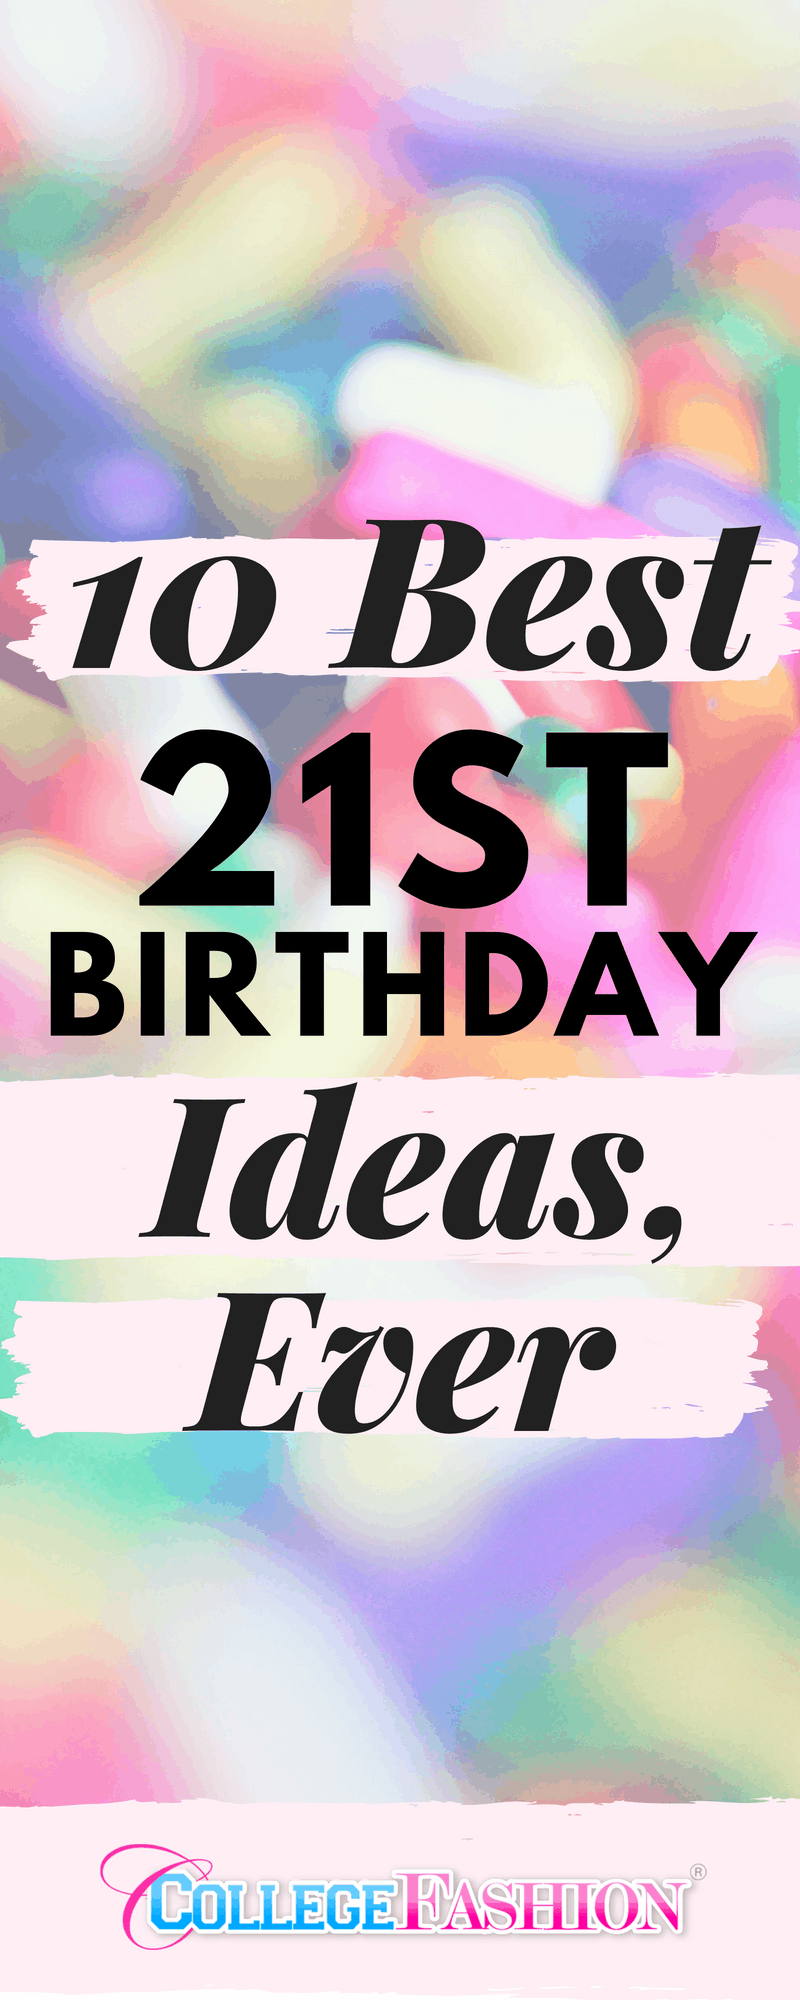 Our 10 Favorite 21st Birthday Ideas, Ever - College Fashion